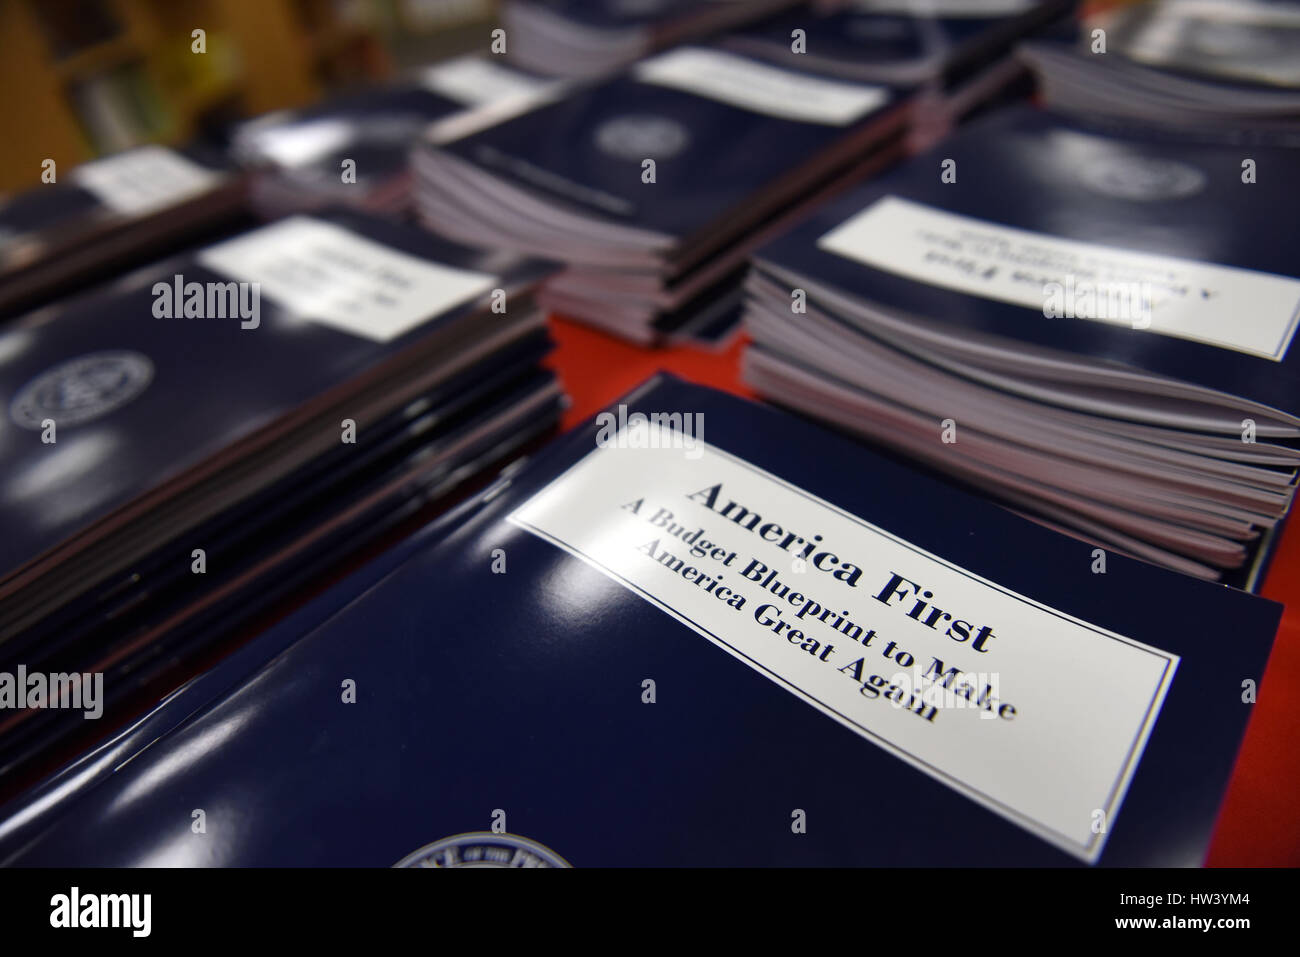 Washington, USA. 16th Mar, 2017. Copies of U.S. President Donald Trump administration's first budget blueprint are seen in Washington, DC, the United States, on March 16, 2017. U.S. President Donald Trump on Thursday unveiled the administration's first budget blueprint which seeks deep cuts across federal departments and agencies in order to fund rising defense spending. Credit: Yin Bogu/Xinhua/Alamy Live News Stock Photo